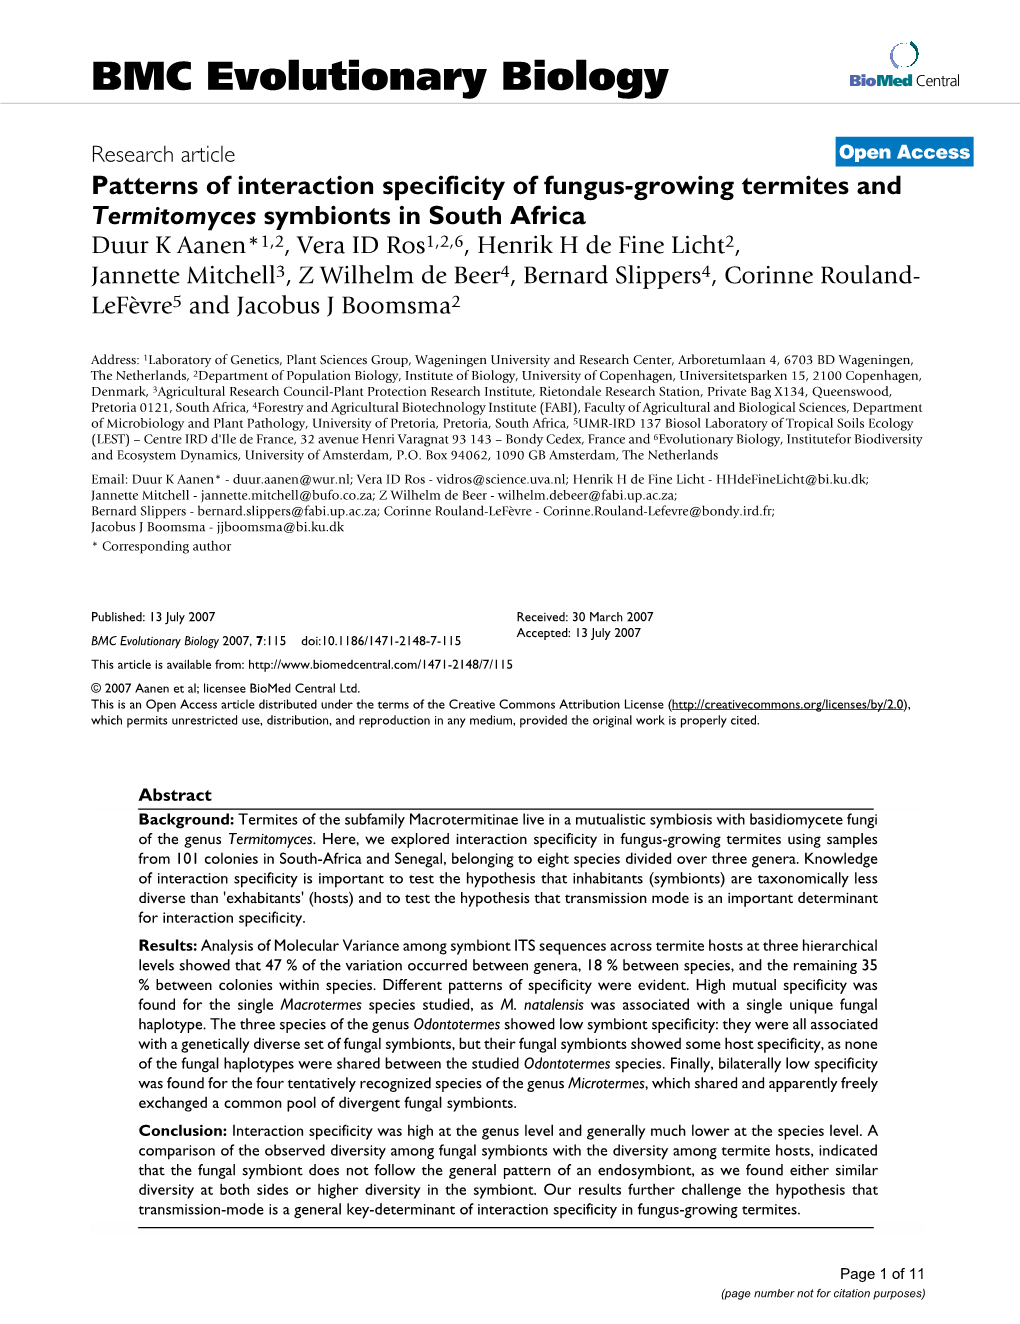 Patterns of Interaction Specificity of Fungus-Growing